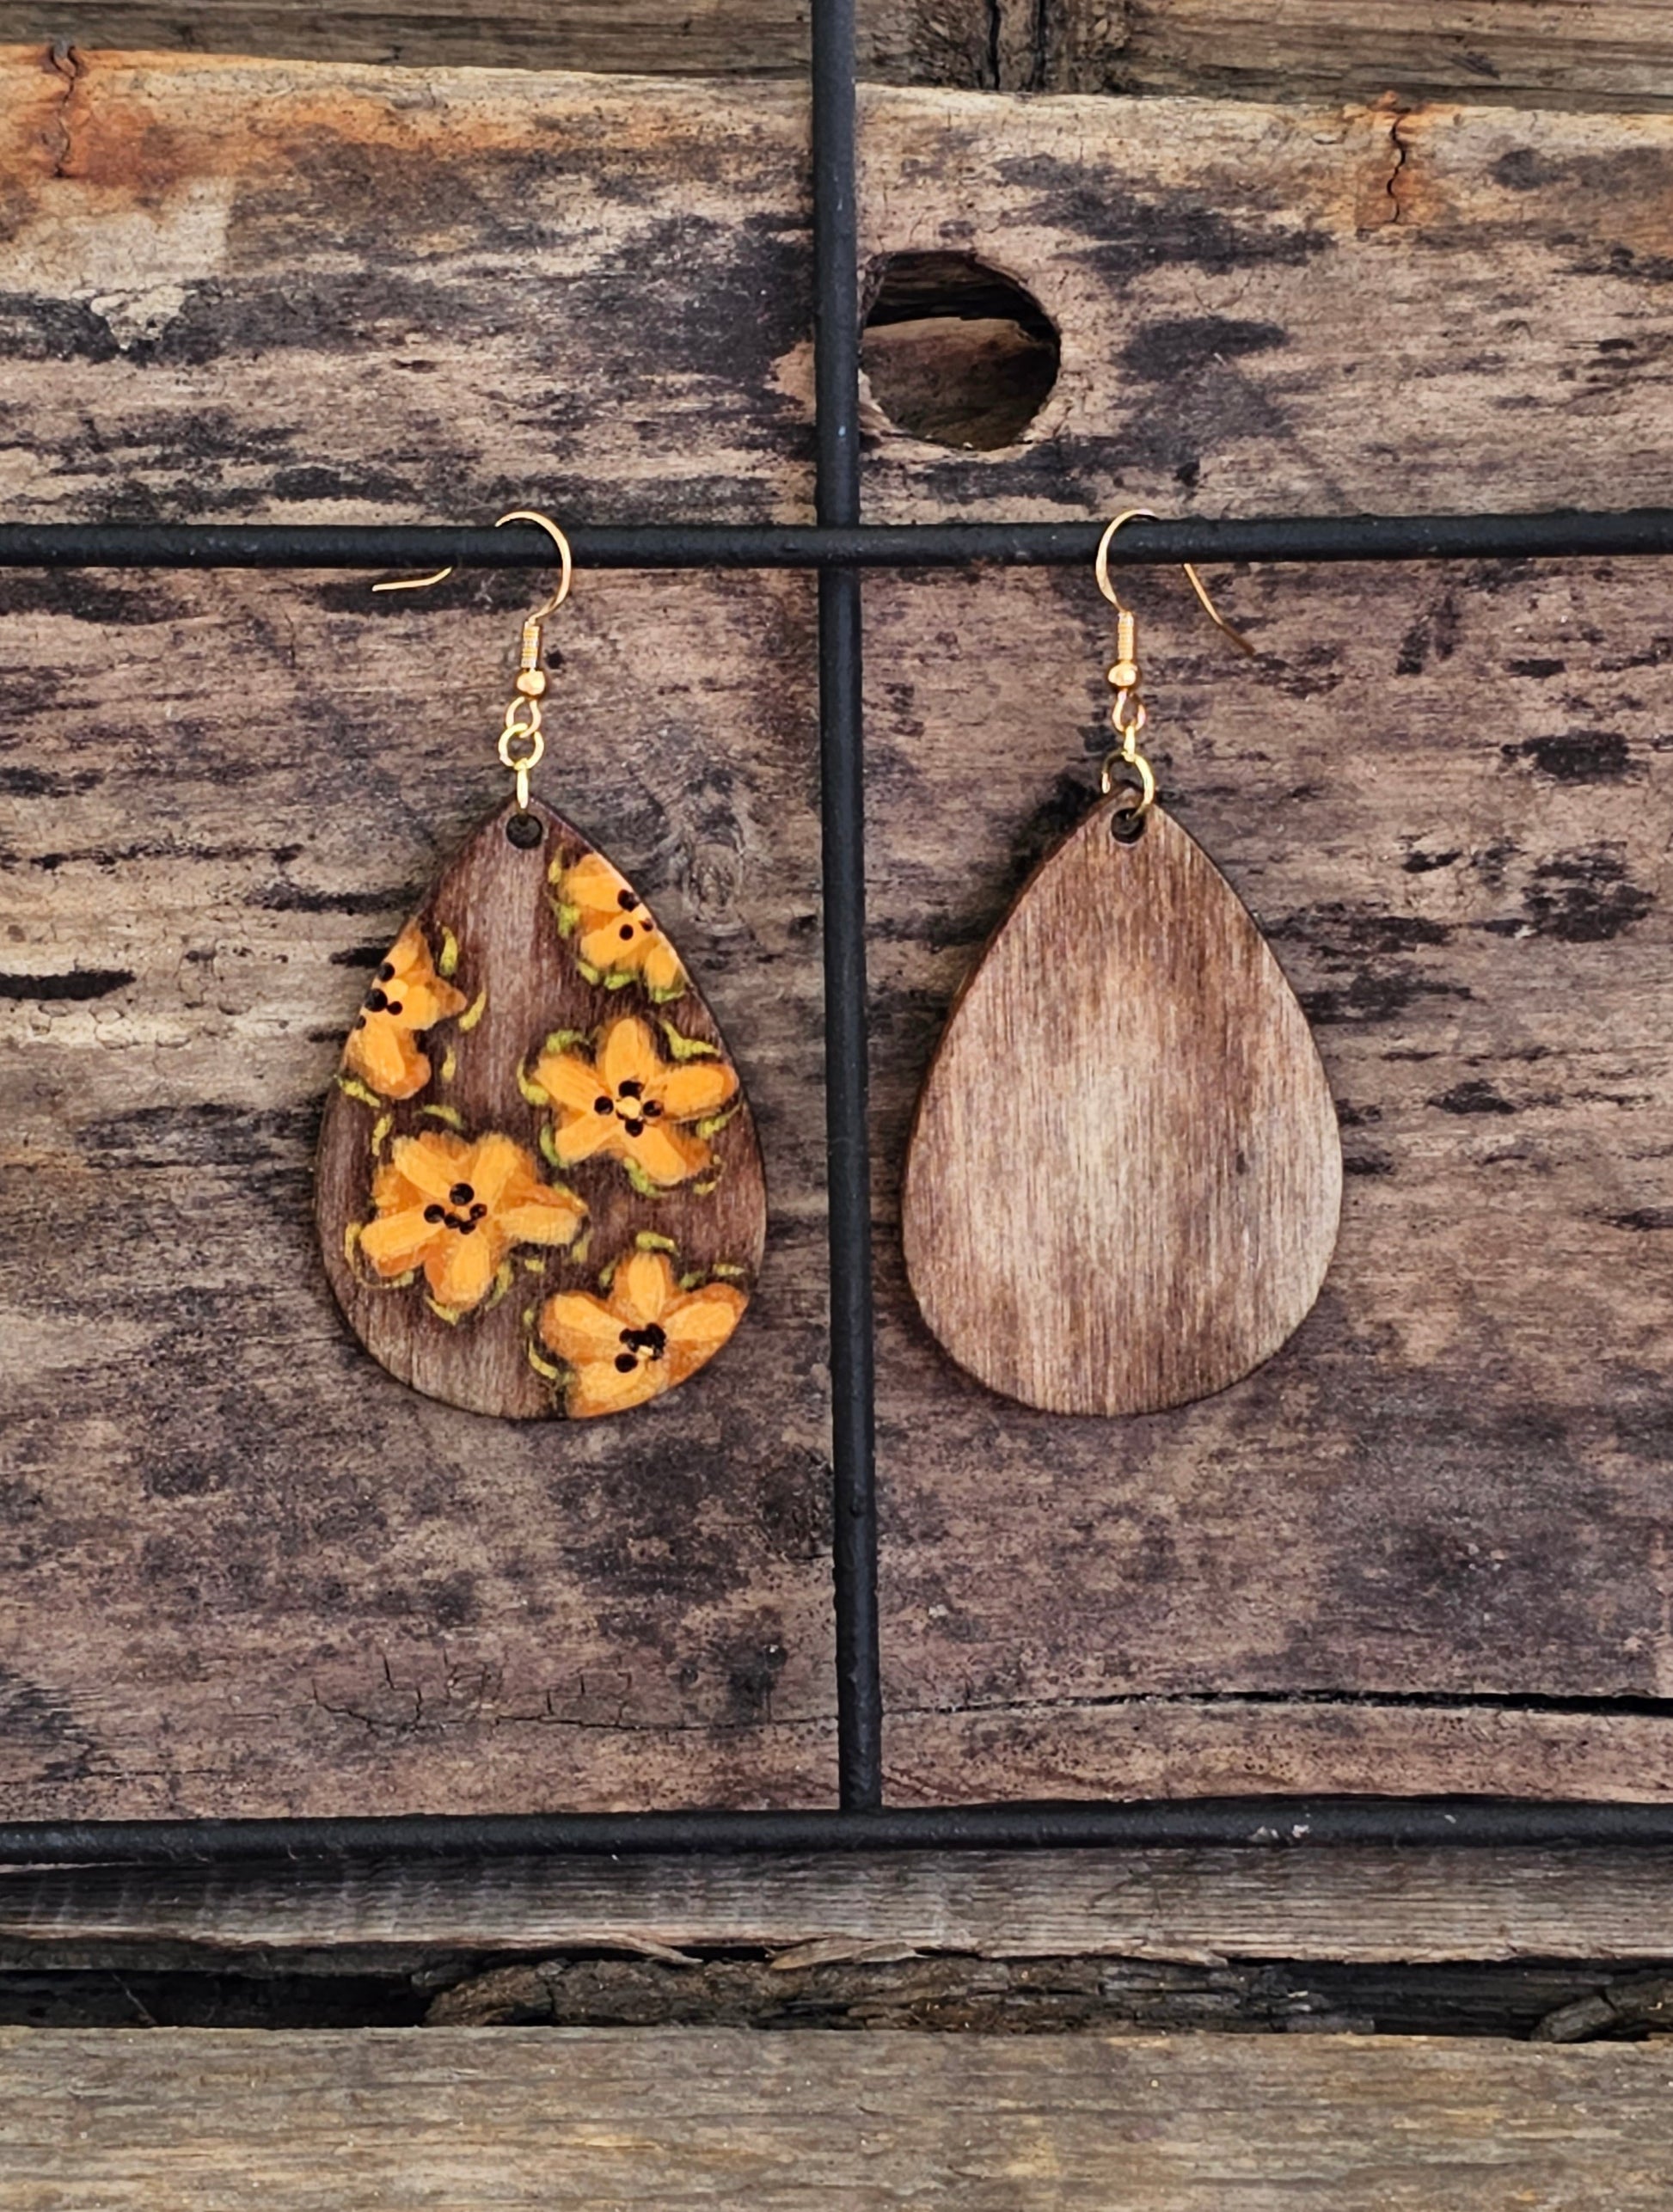 Hand Painted Ultra Lightweight Wooden Earrings. Watercolor and Acrylic.  Espresso brown washed background color with muted orange lilies painted design. Dark brown painted edge detail with accents of gold. Teardrop in shape. Back is painted in complimentary color. 14kg over Sterling Silver Findings. Hangs 2 1/4" in Length